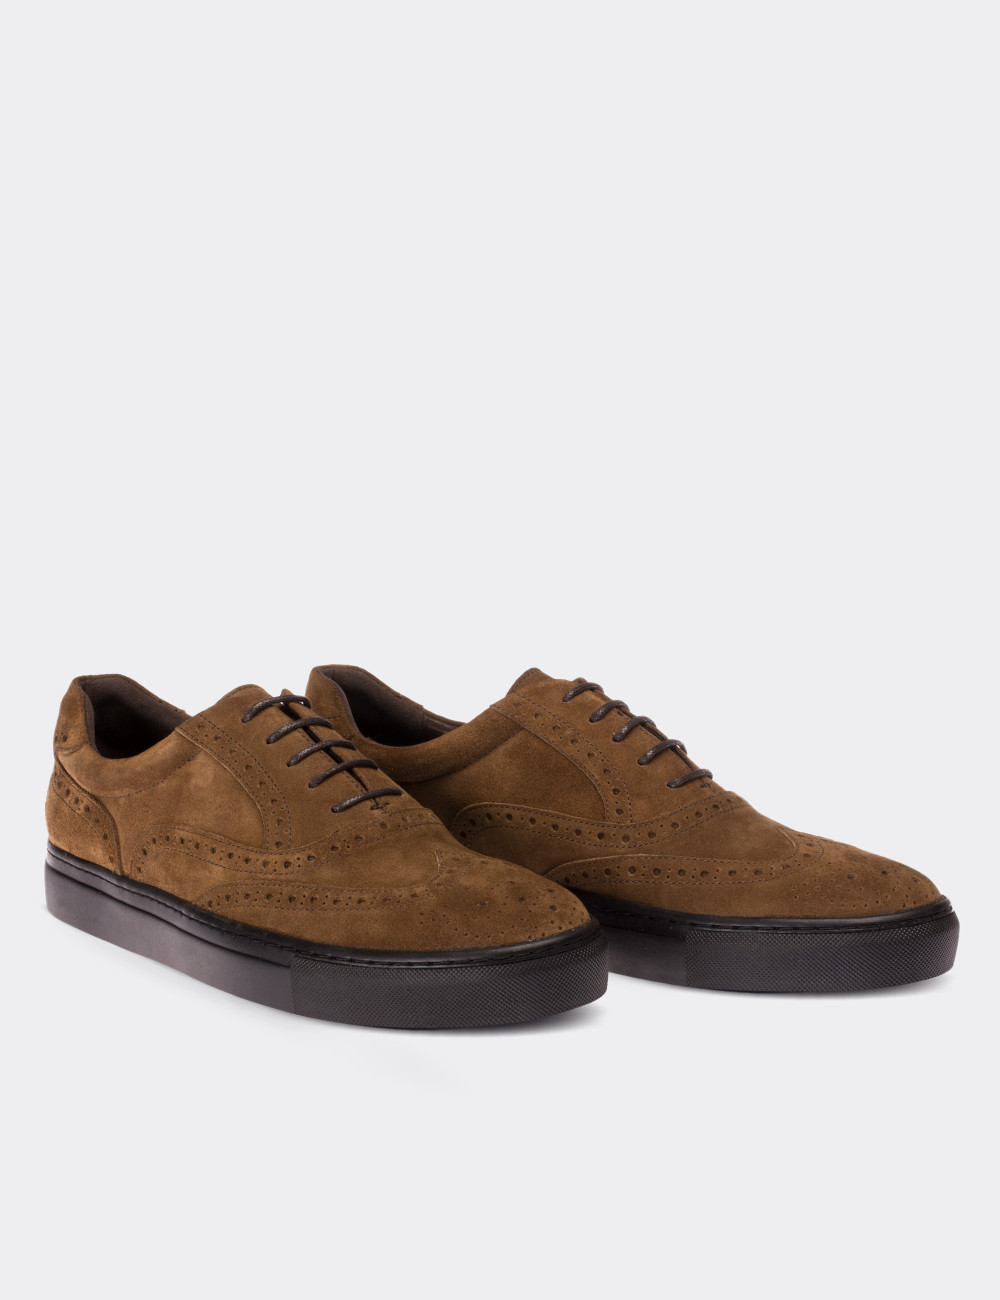 Tan Suede Leather Sneakers - 01637MTBAC04